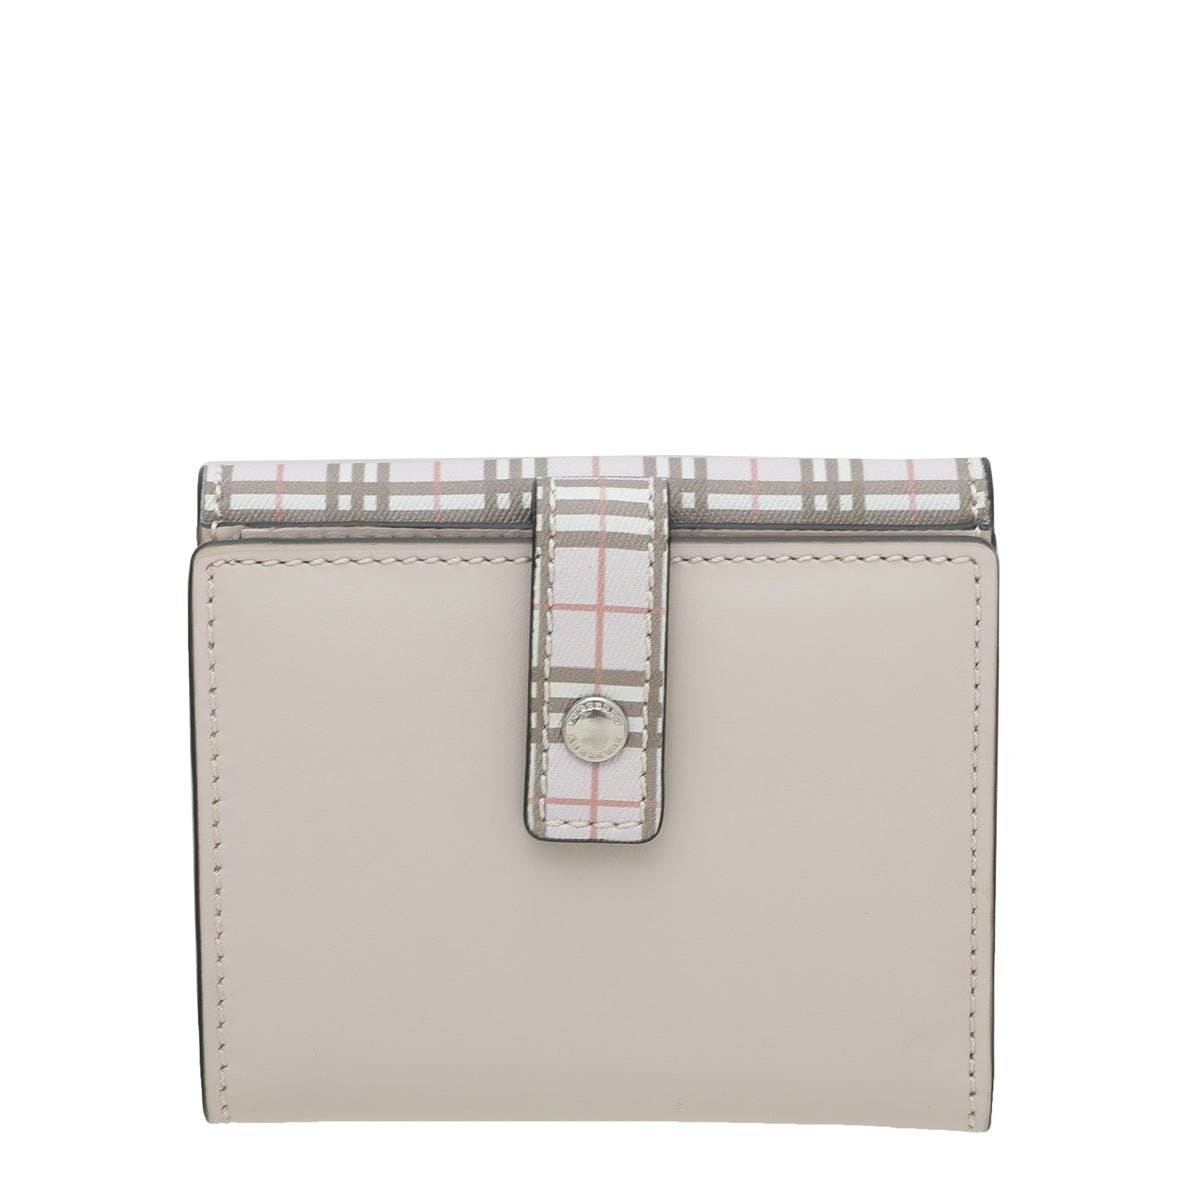 thecloset.uae - Burberry Light Pink Check French Wallet | The Closet